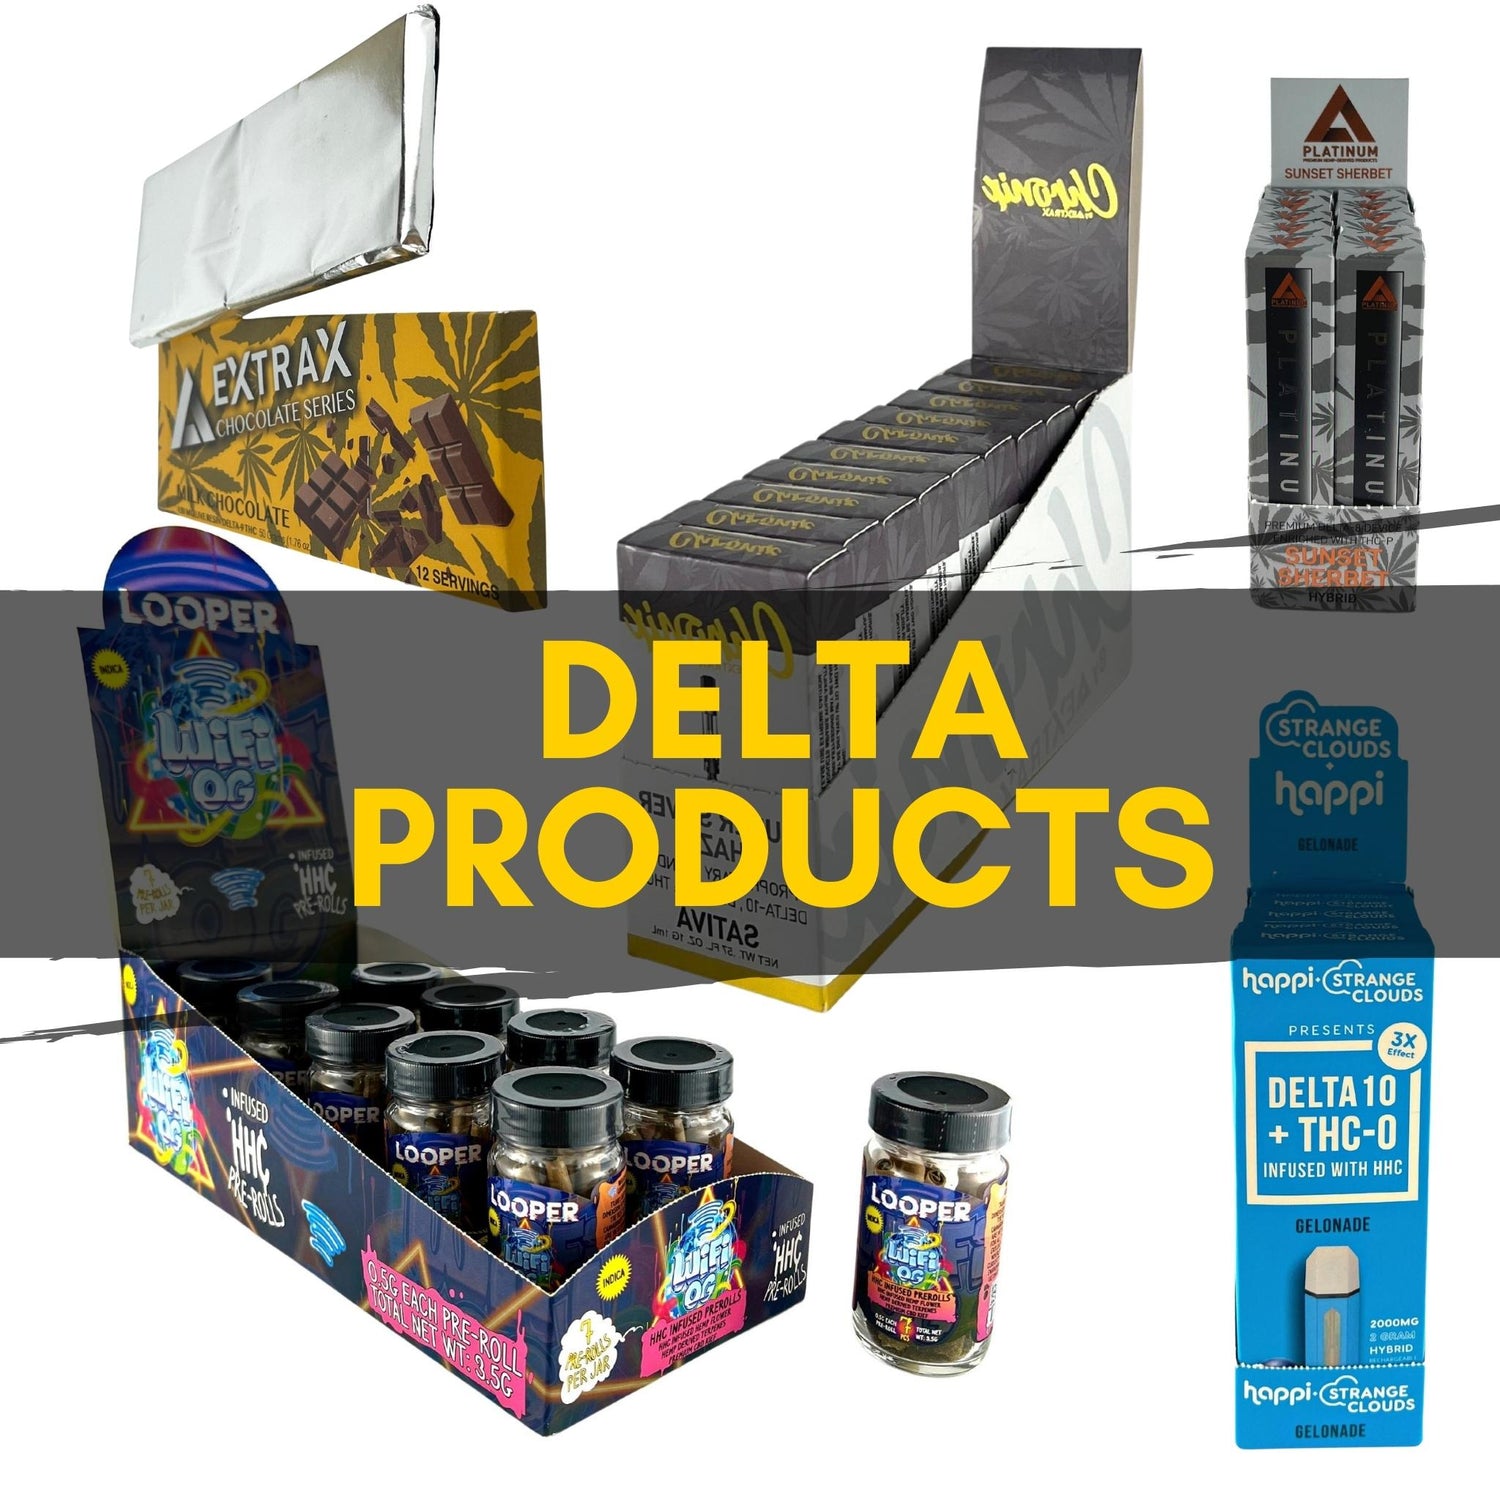 DELTA PRODUCTS